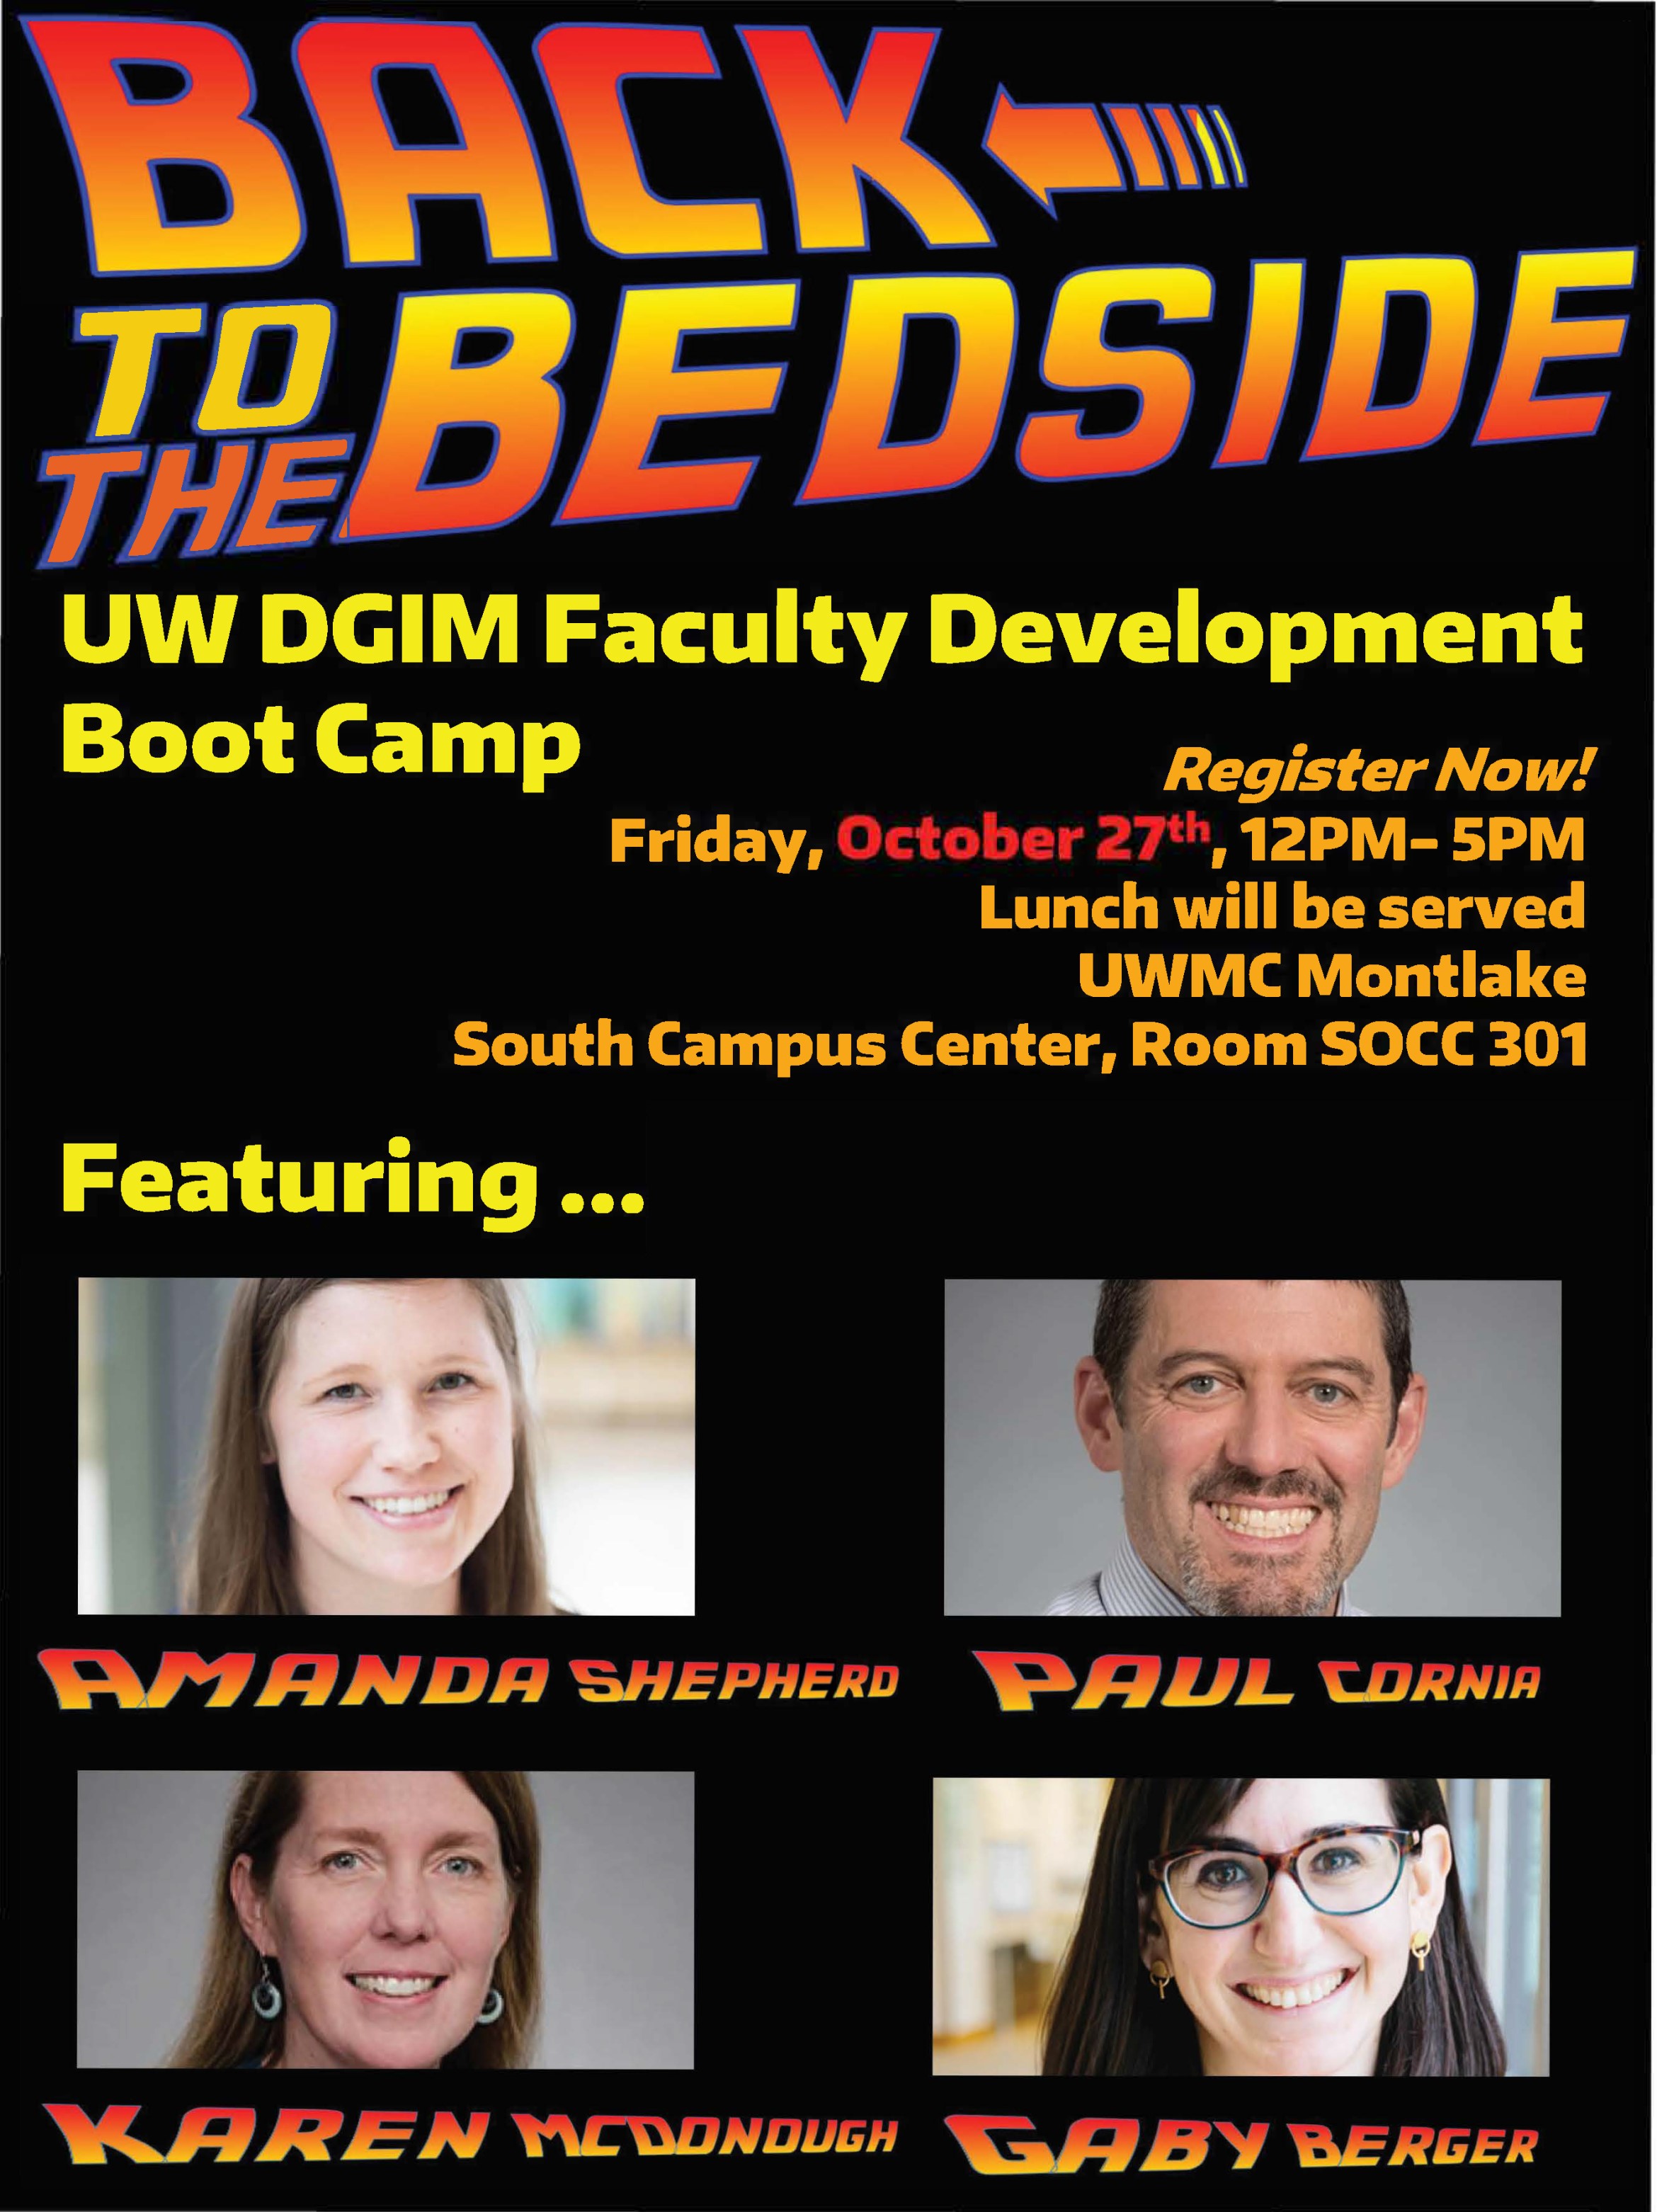 2023 FDP Boot Camp Flyer with the information above w/ photos of faculty, all in the style of the Back to the Future films of the 1980s